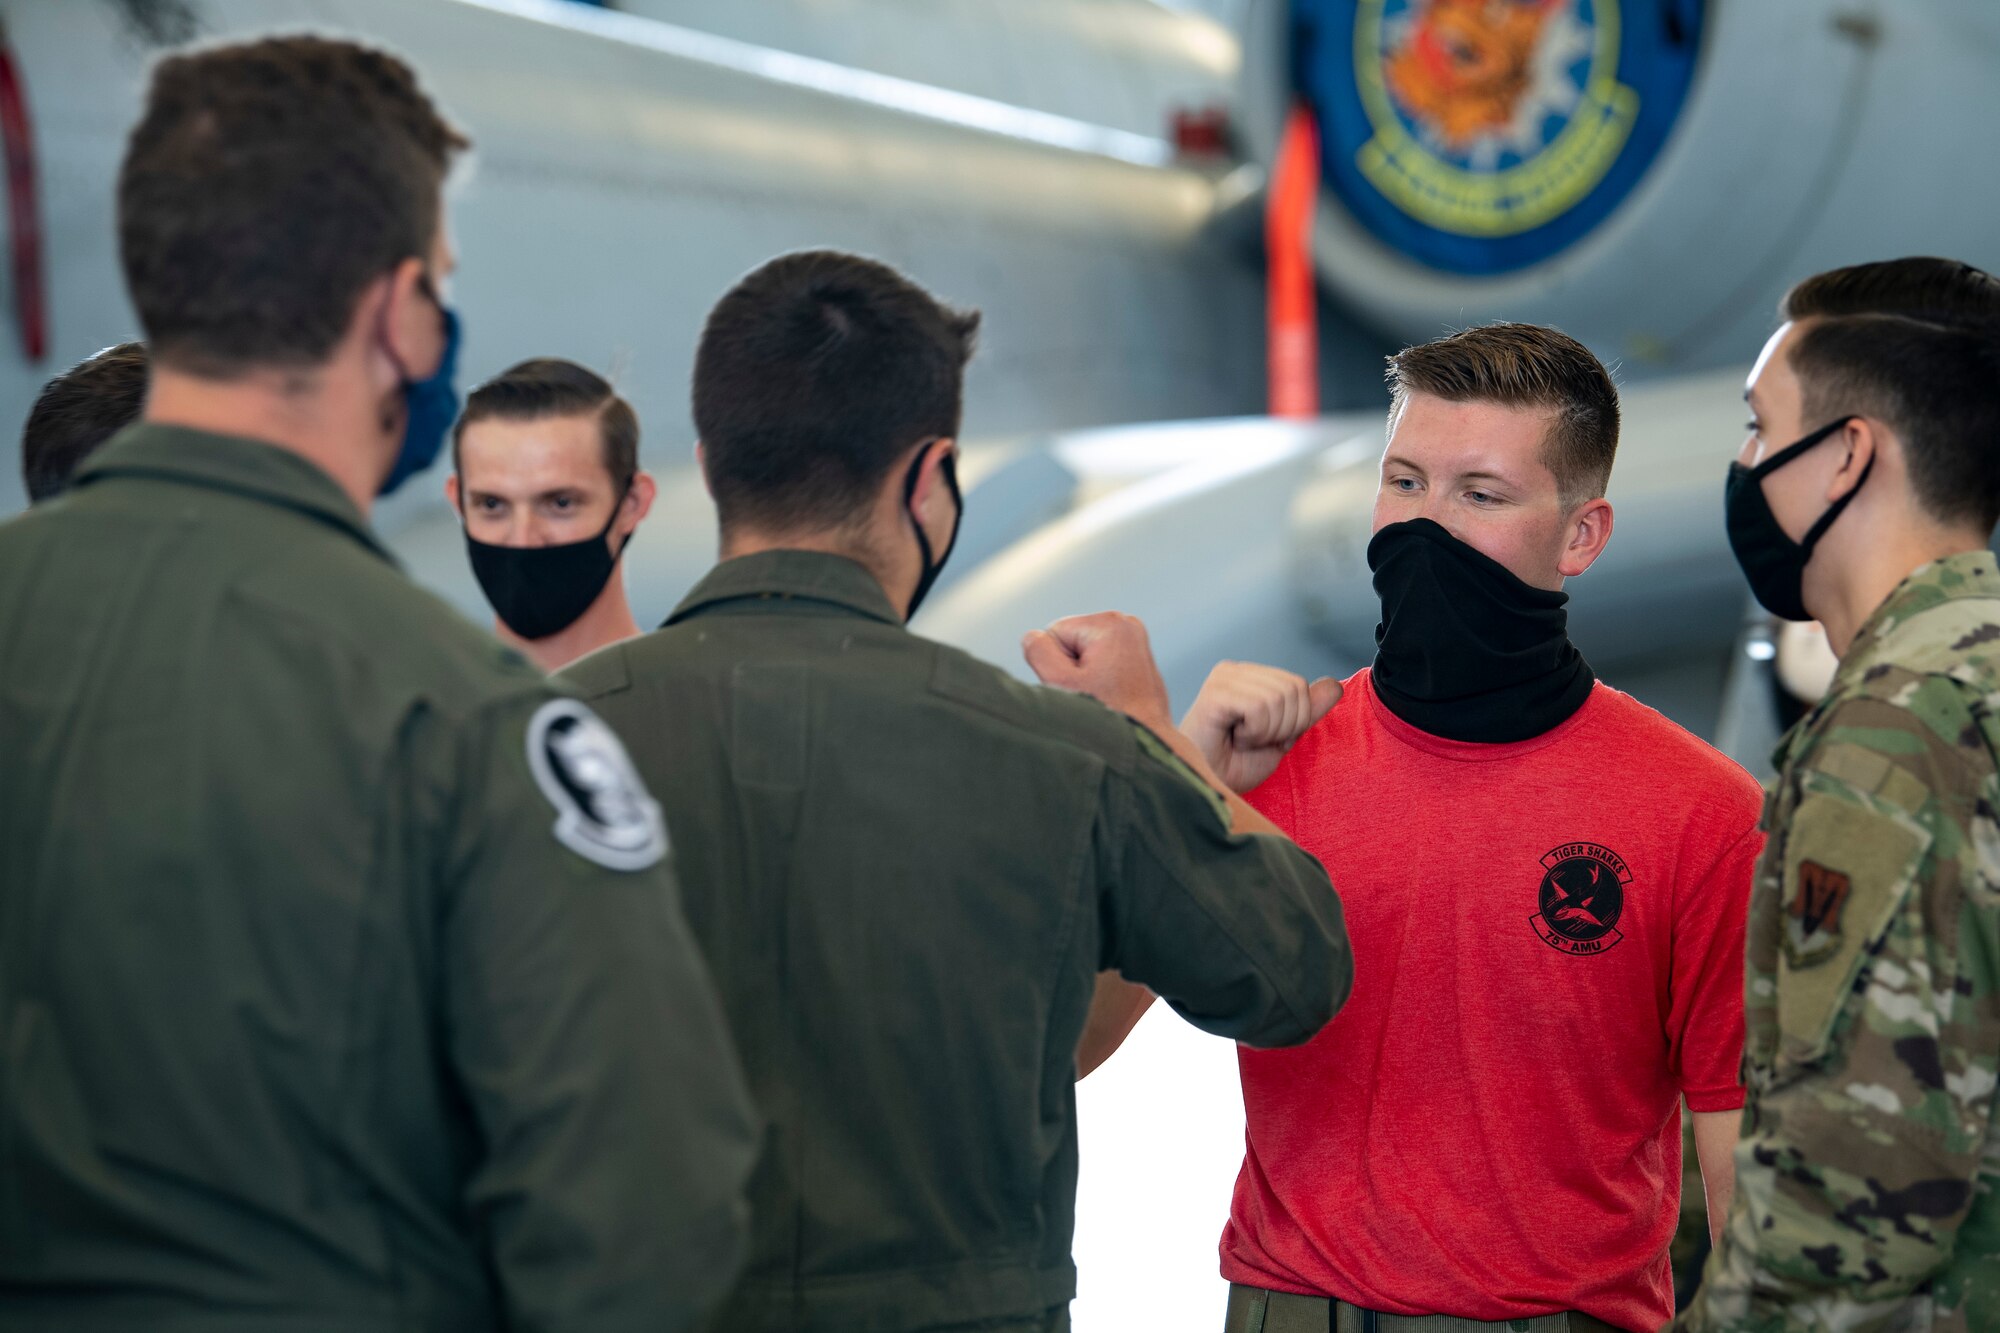 A photo of Airmen bumping fists after a competition